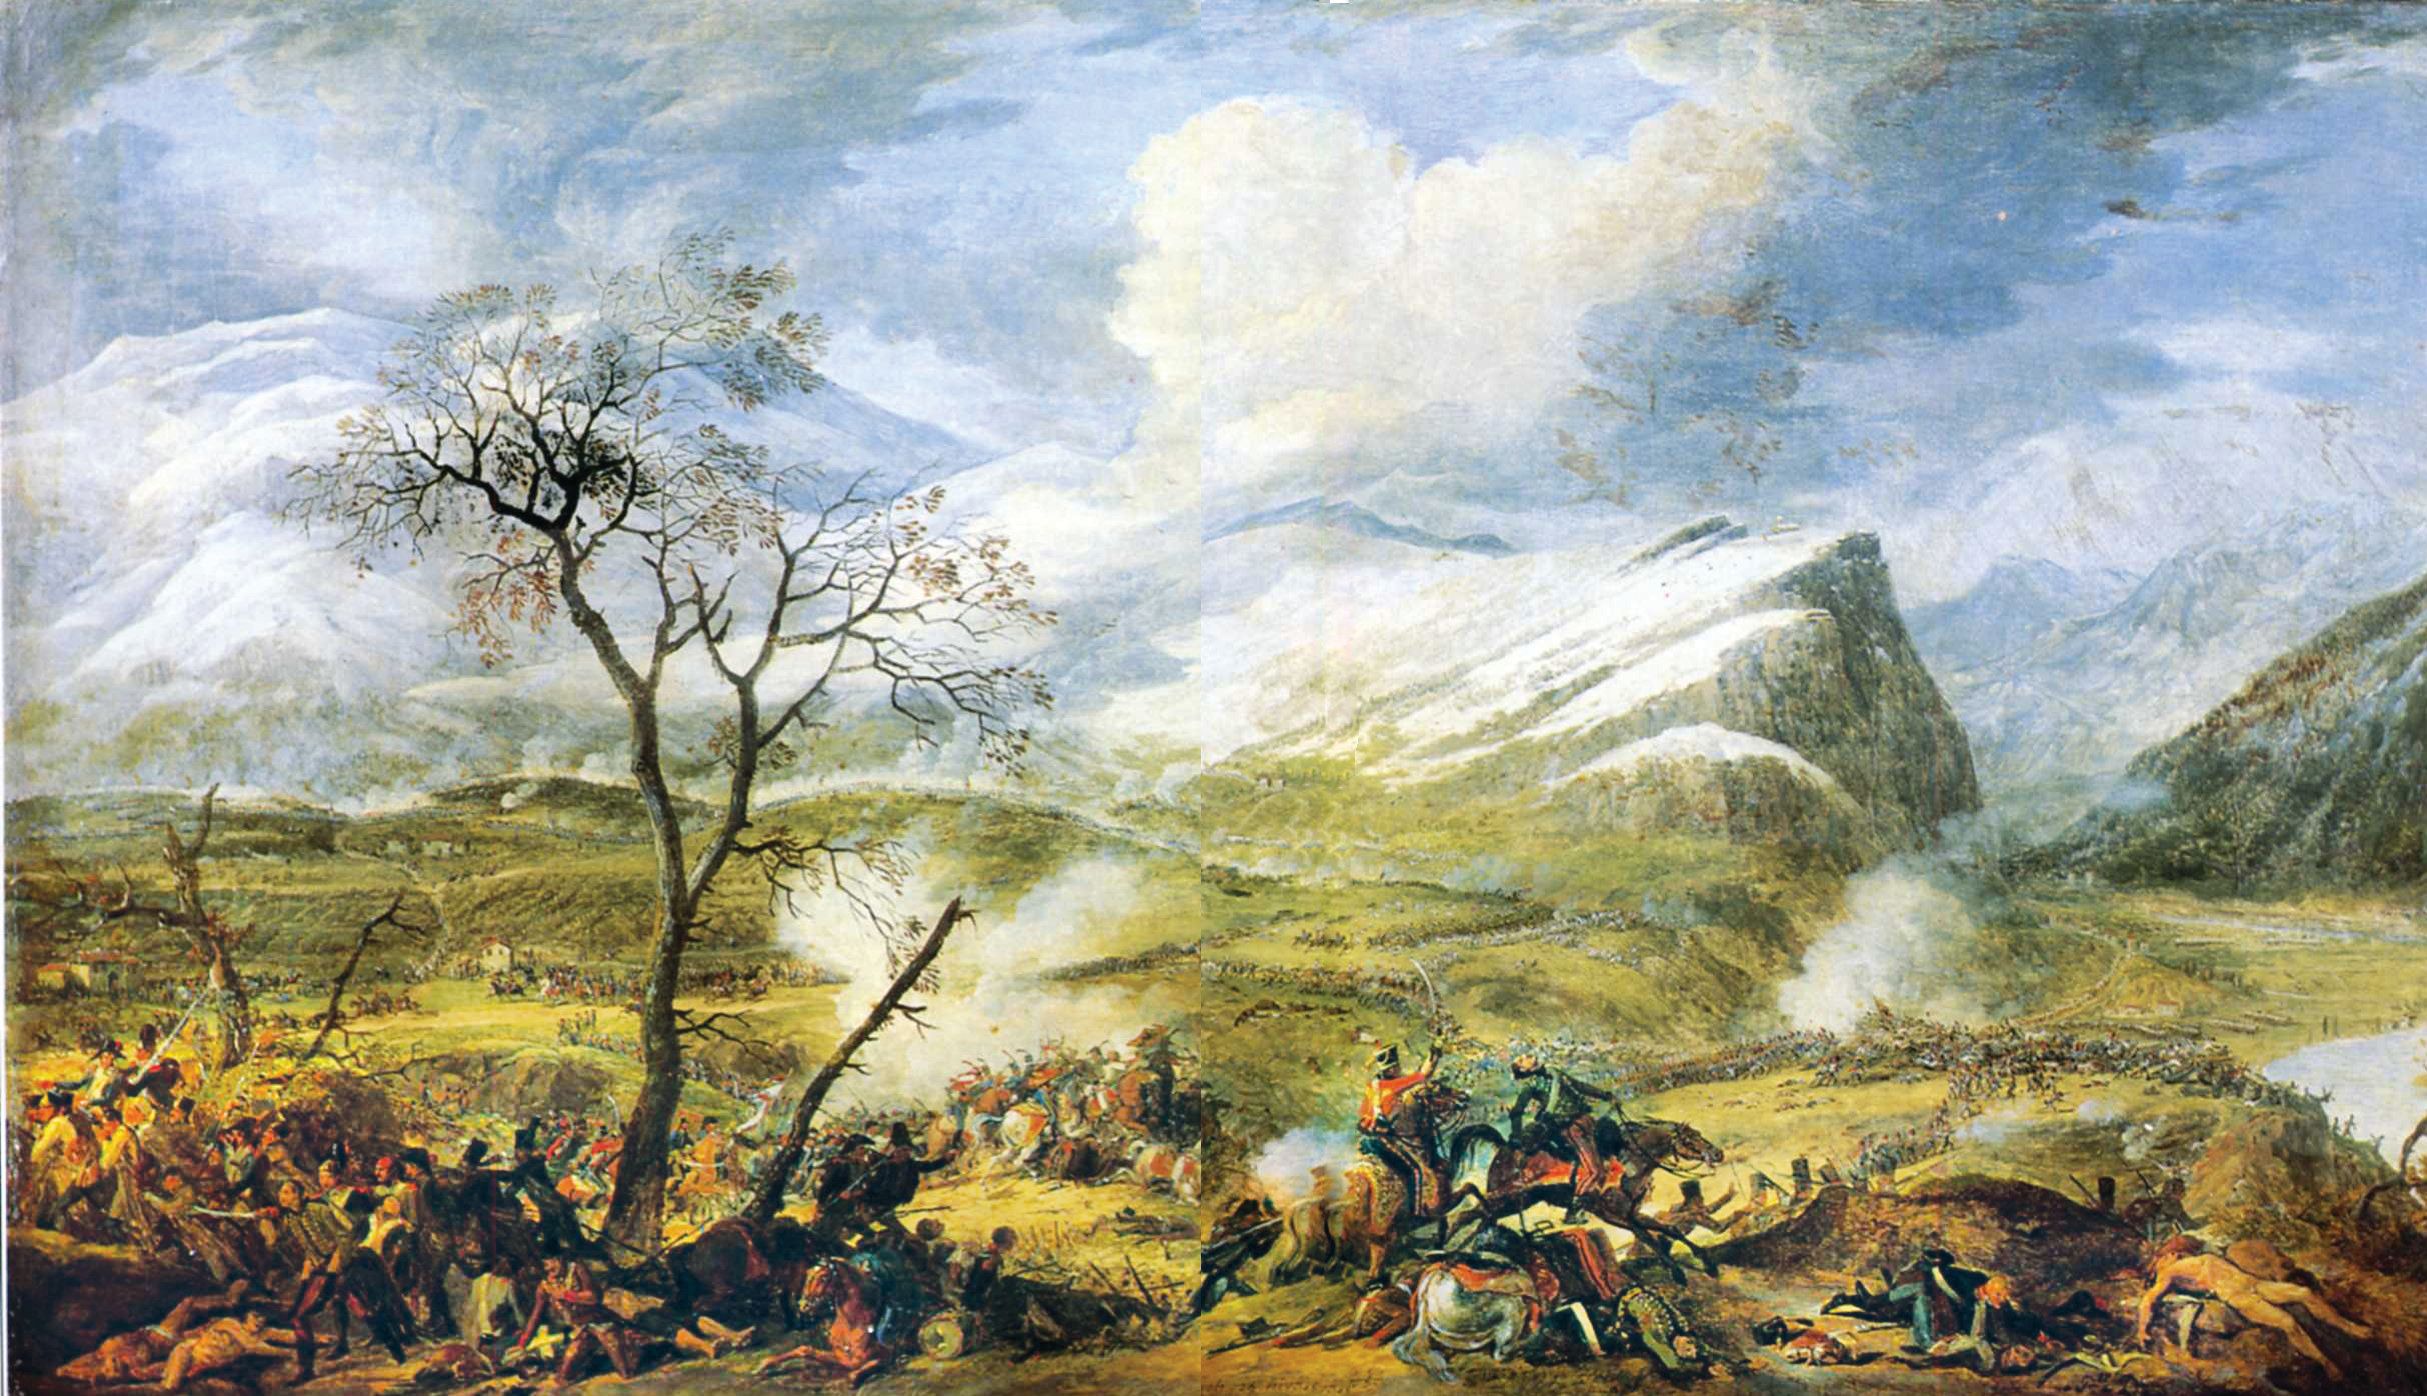 Austrian troops became disorganized as they fought across the broken terrain at the Battle of Rivoli, and French cavalry exploited the situation.